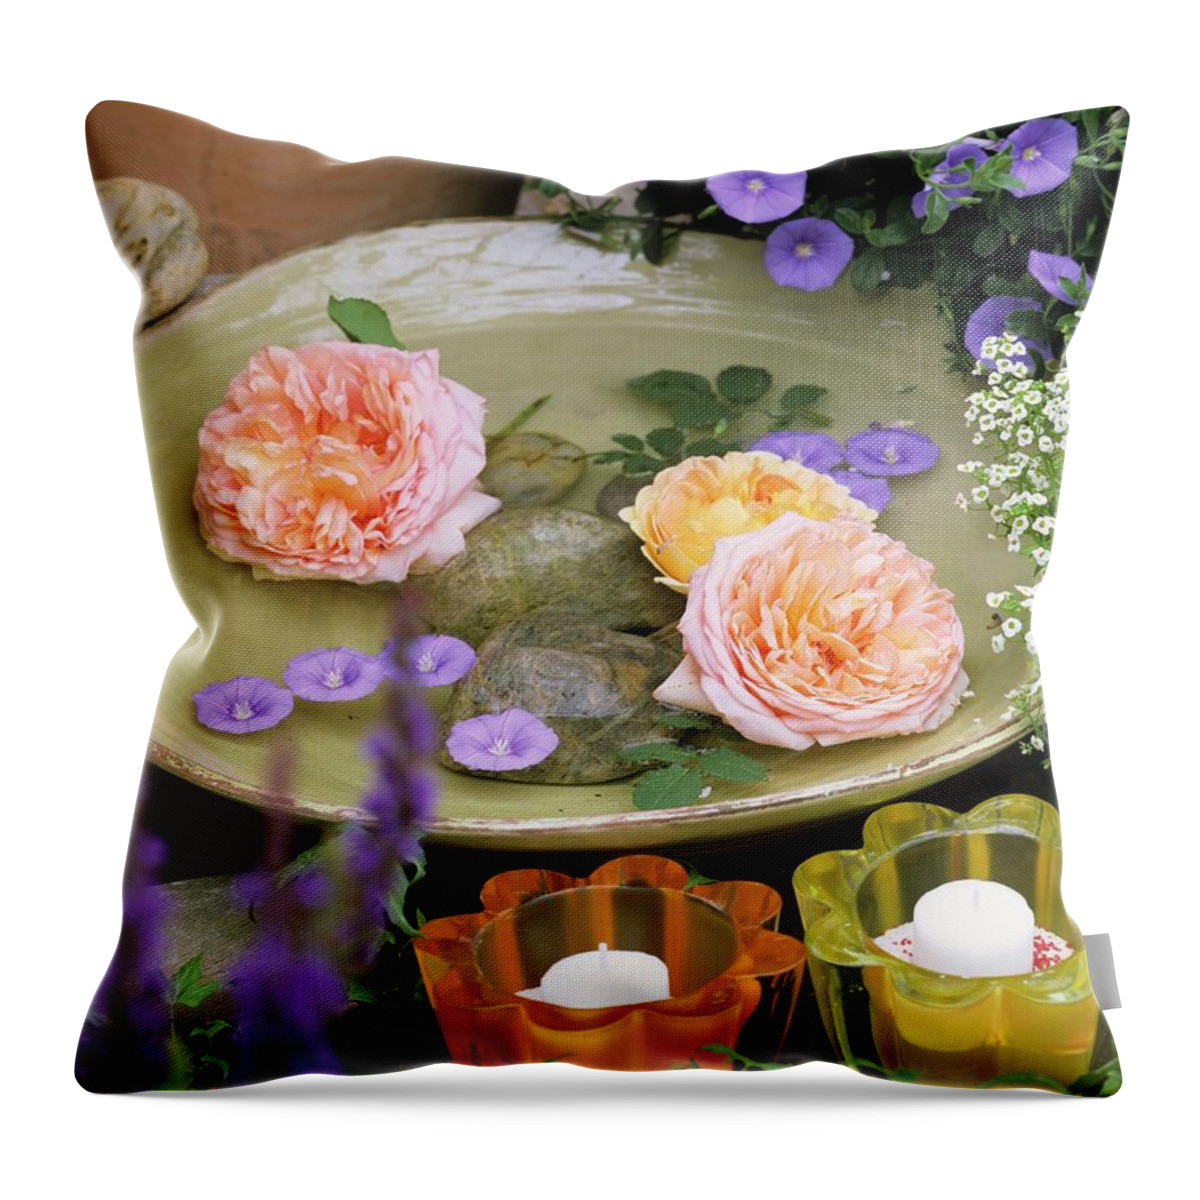 Ip_00271107 Throw Pillow featuring the photograph Bowl Of 'david Austin' Roses by Friedrich Strauss